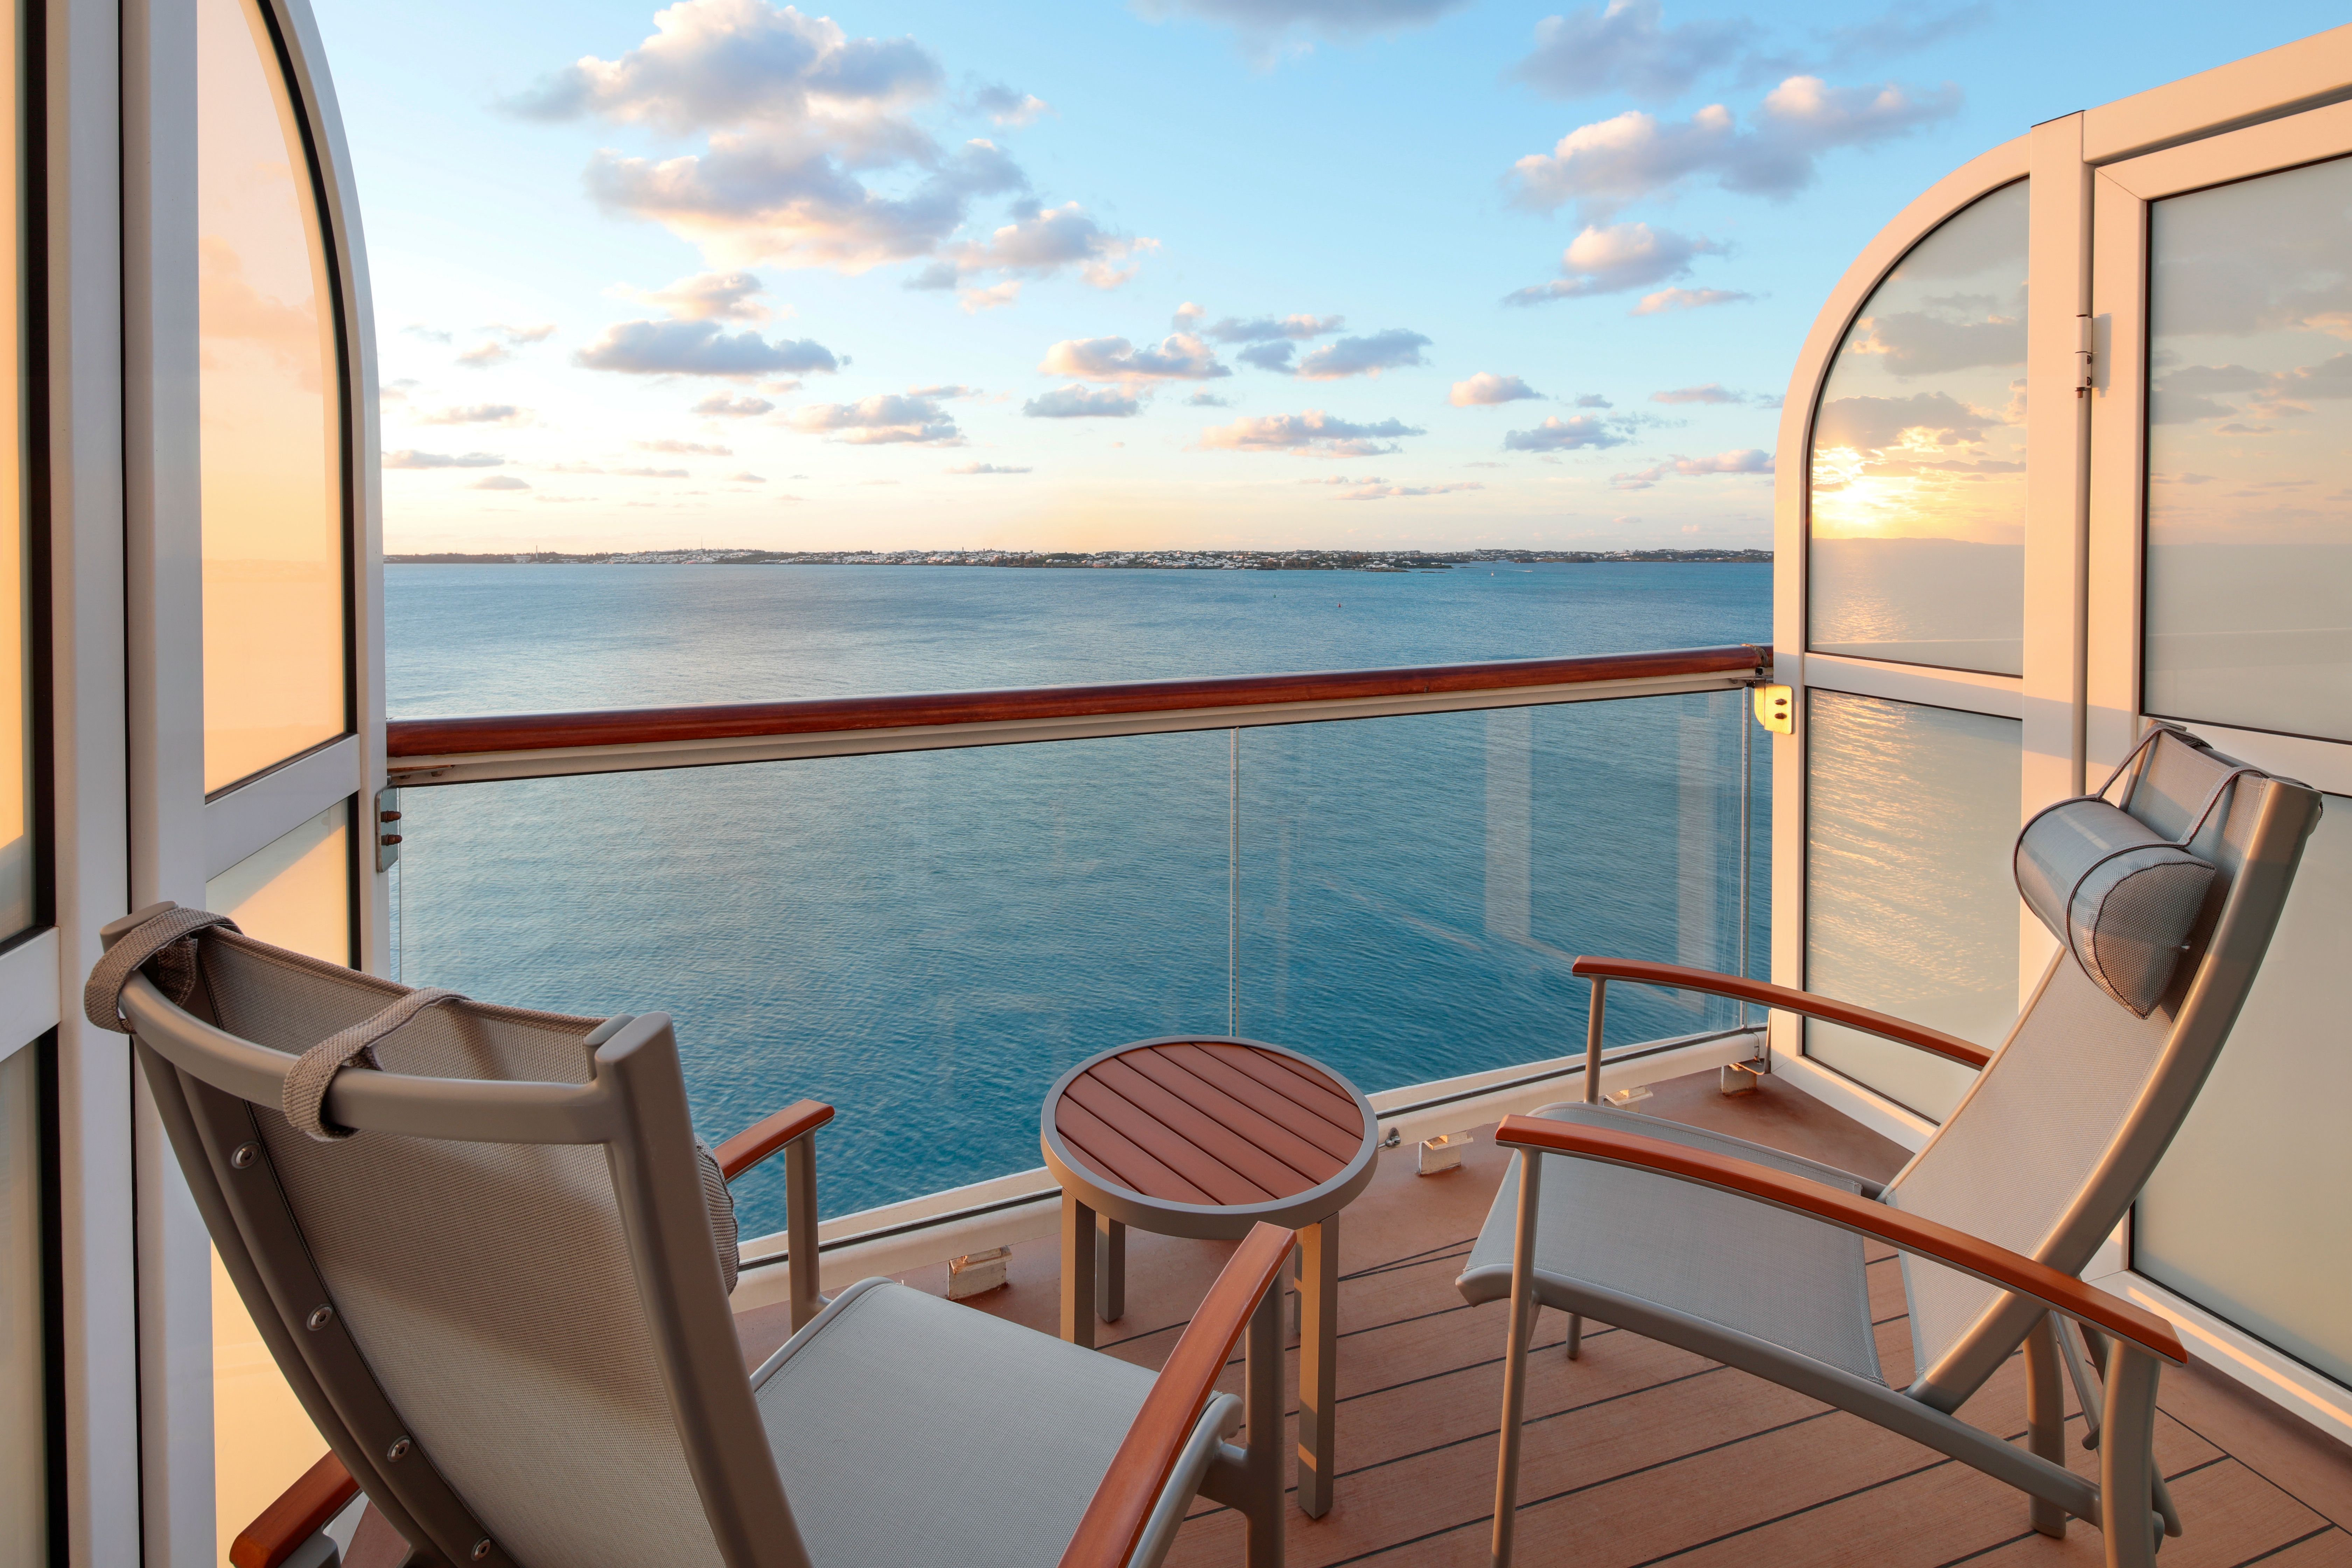 Aqua class balcony stateroom on Celebrity Summit featuring comfortable outdoor seating and expansive ocean views at sunset.